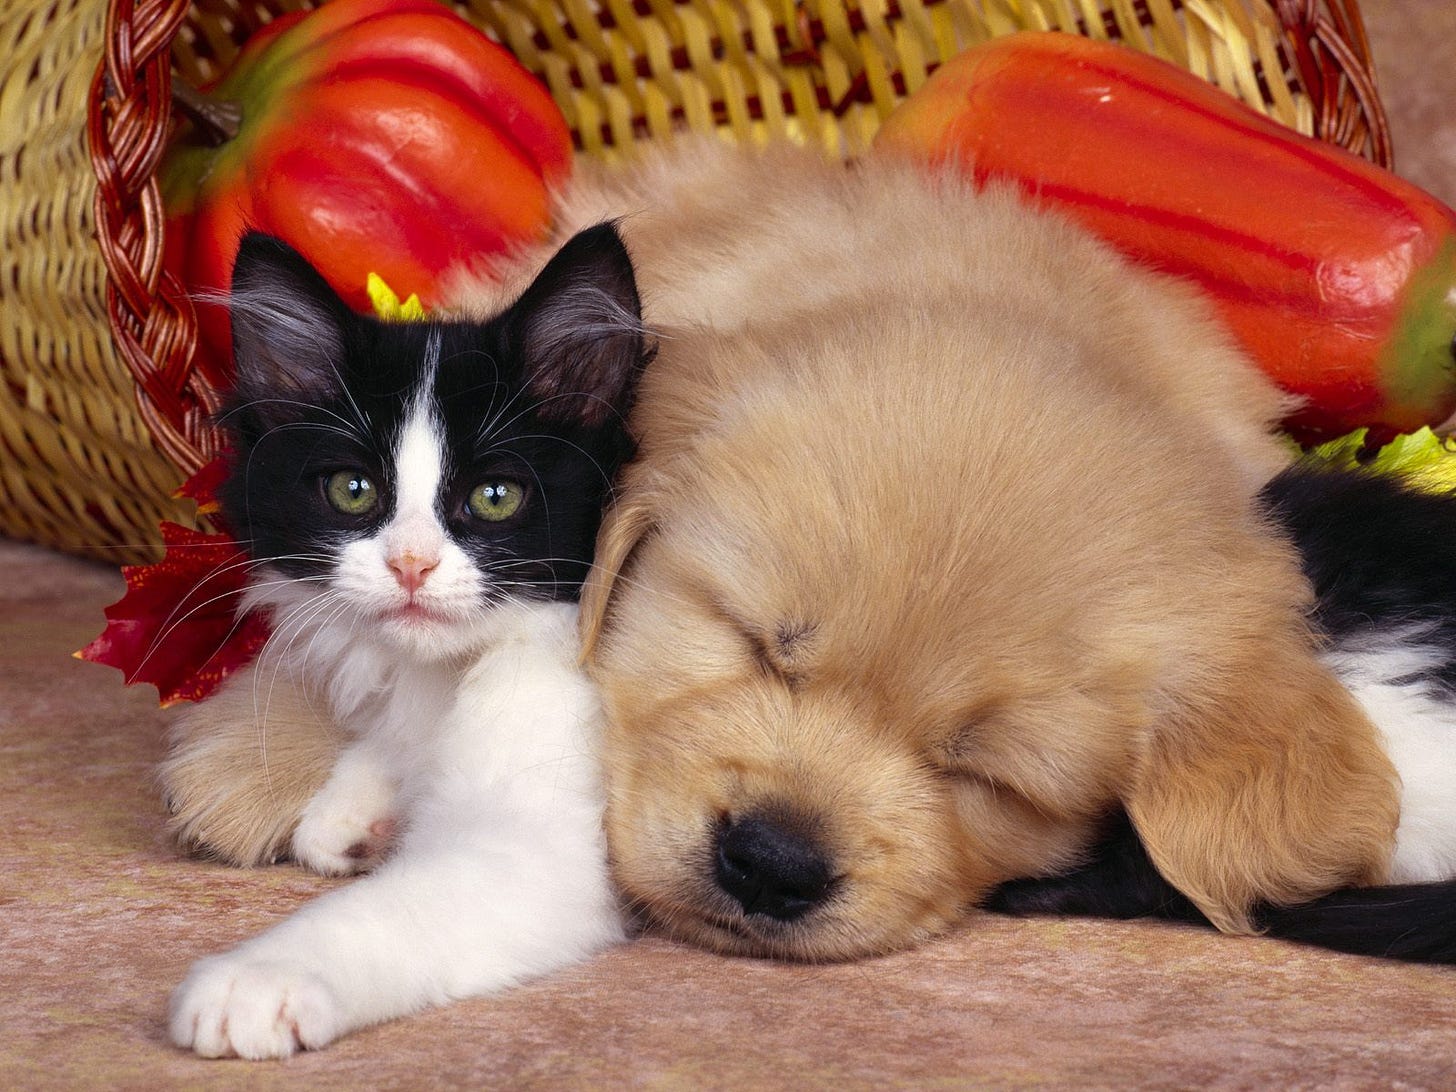 A cat and a dog lying on a blanket

Description automatically generated with low confidence